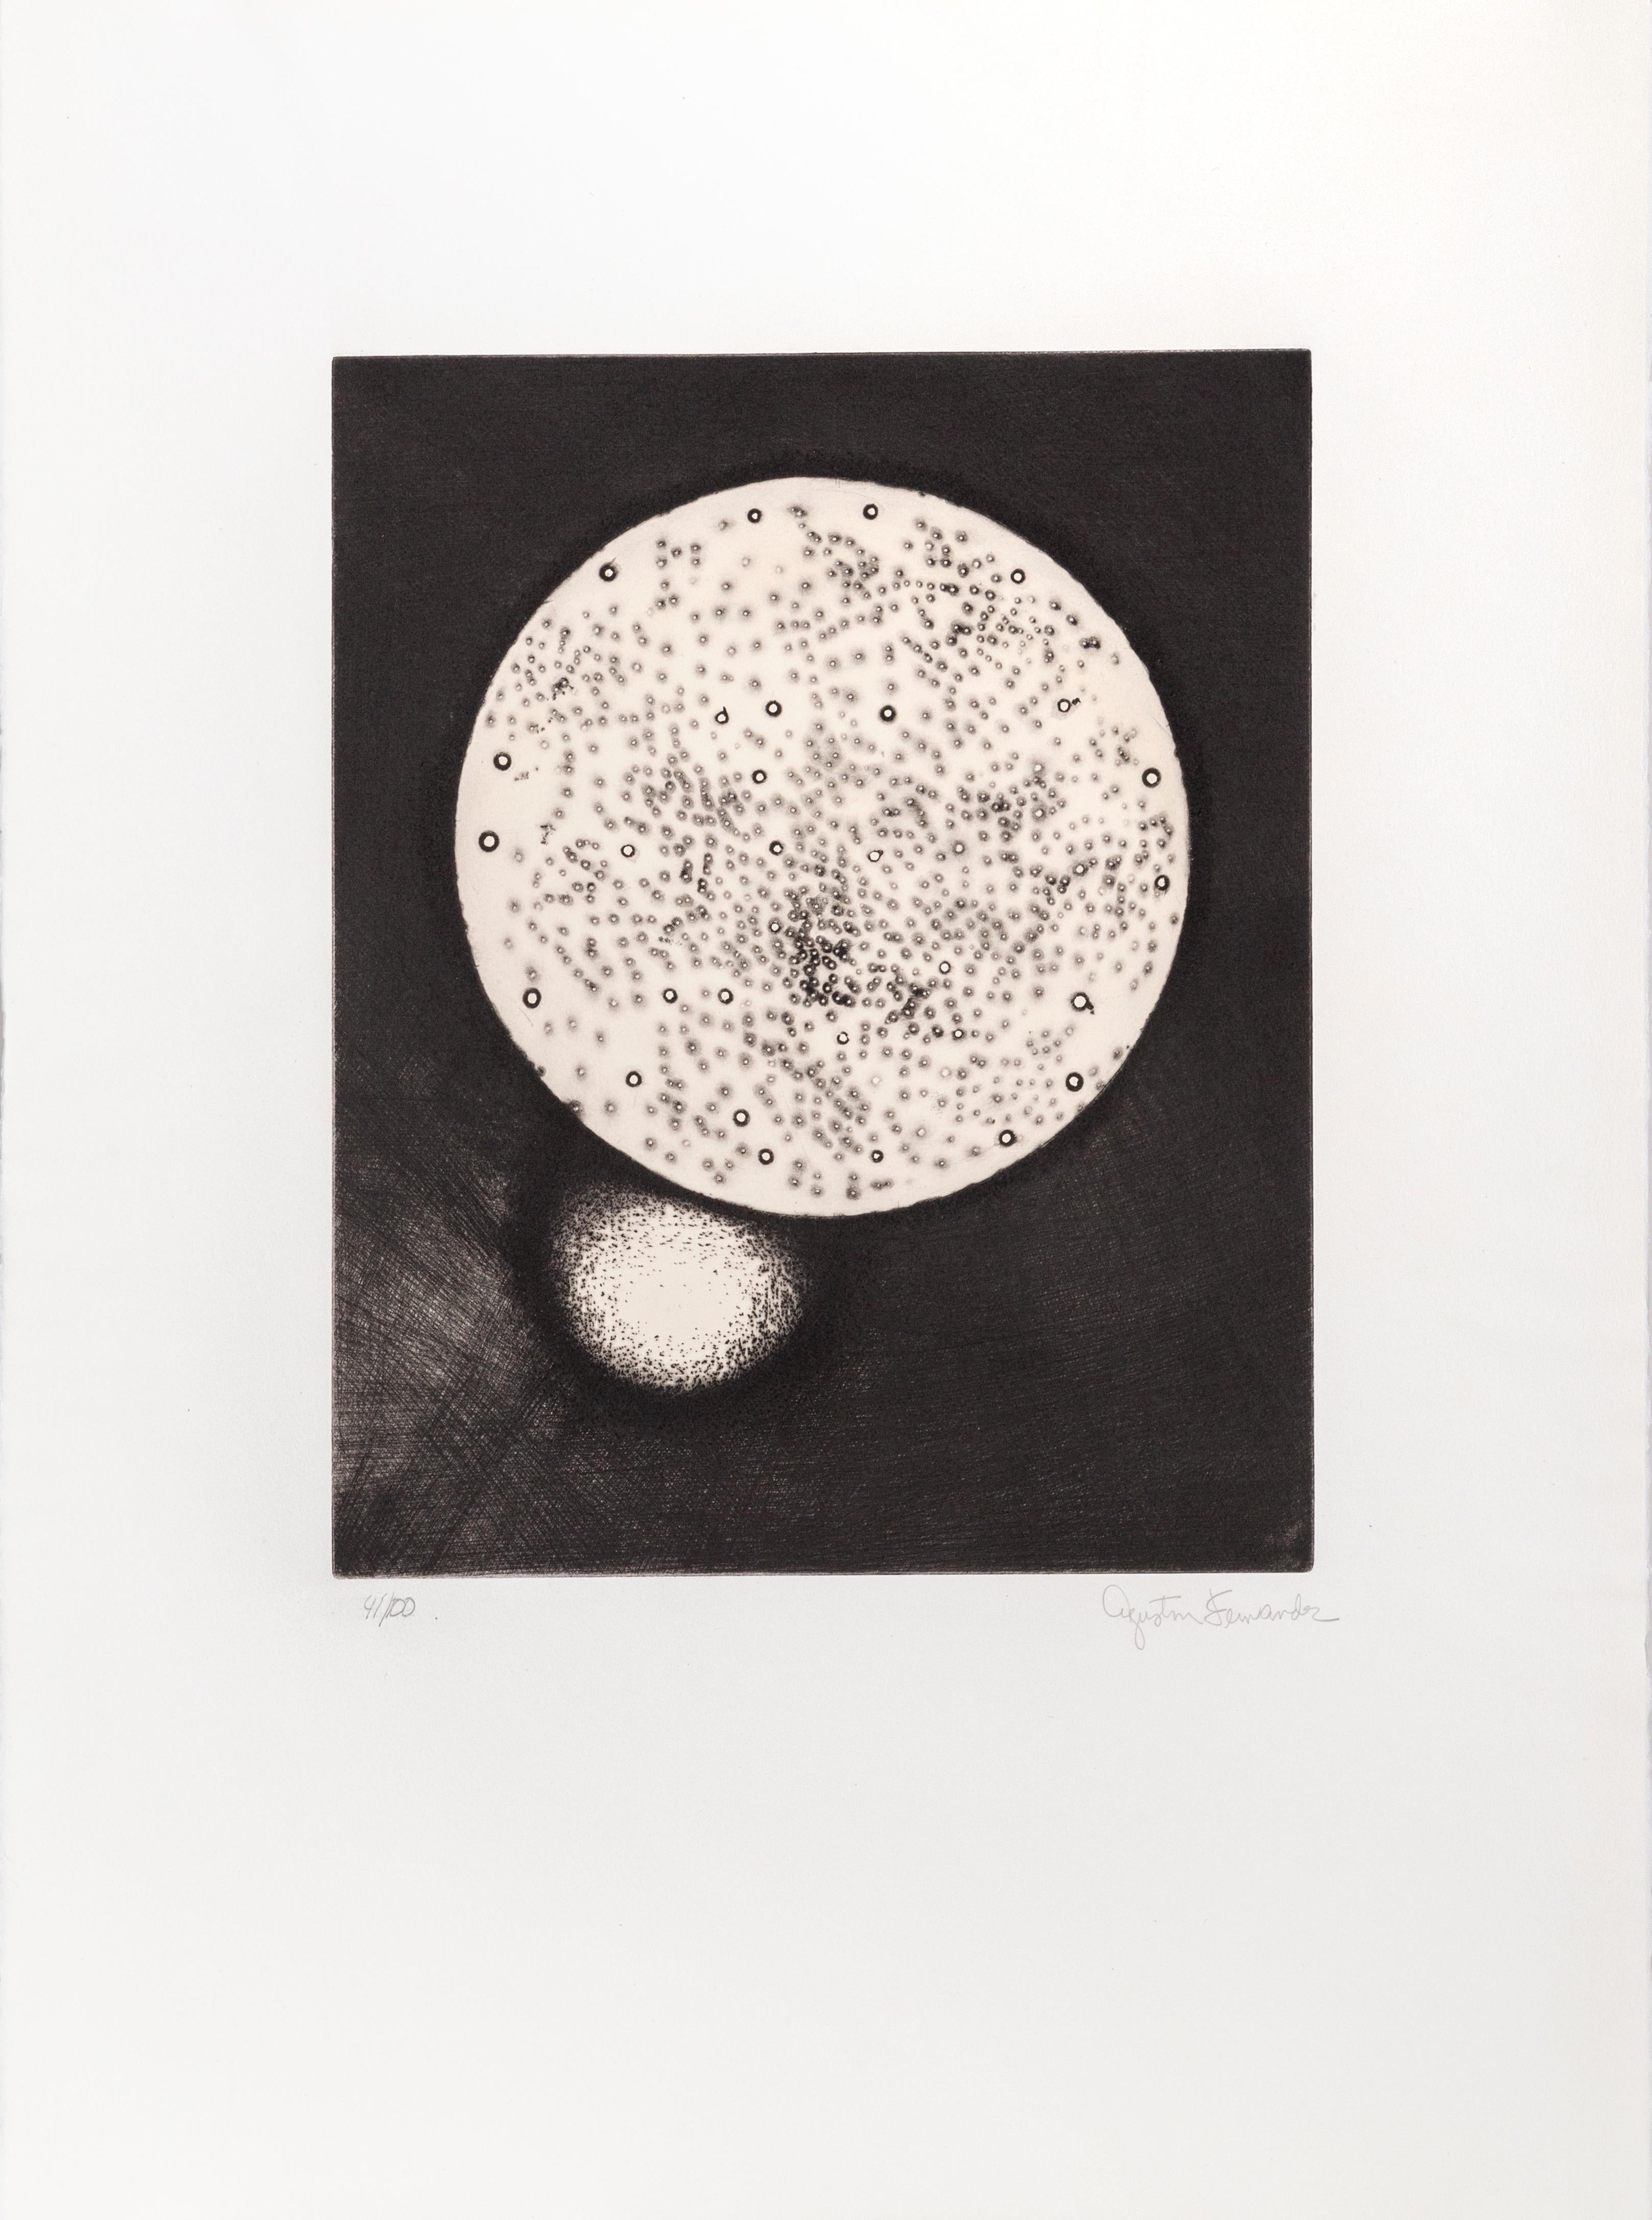 From L.A., Abstract Etching by Agustin Fernandez